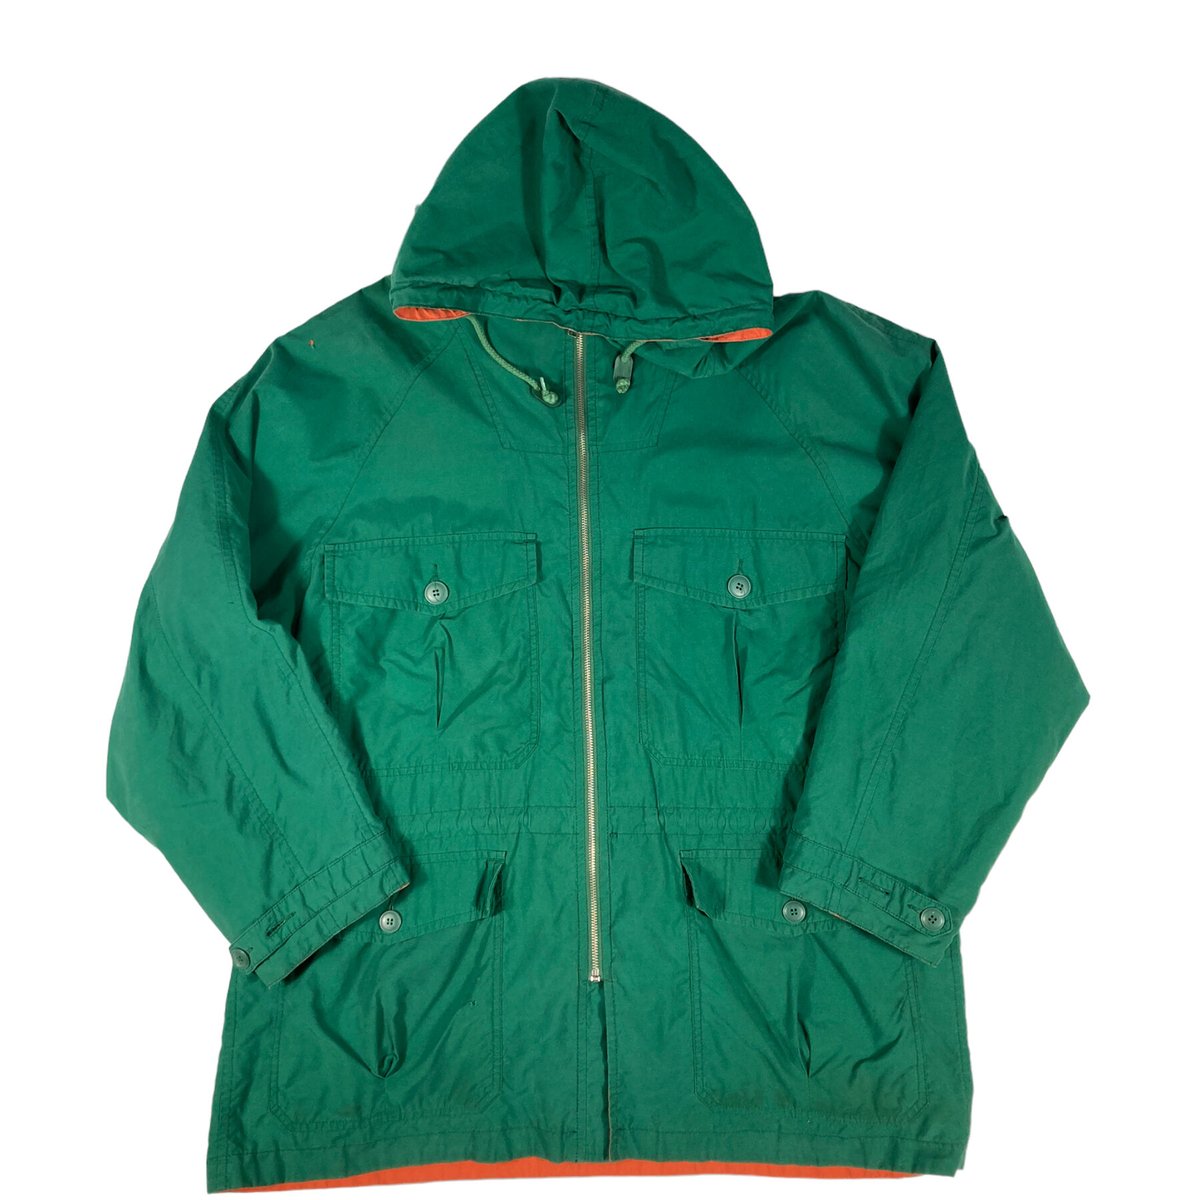 L】90'S OLD GAP MOUNTAIN JACKET | CLOCK STORE